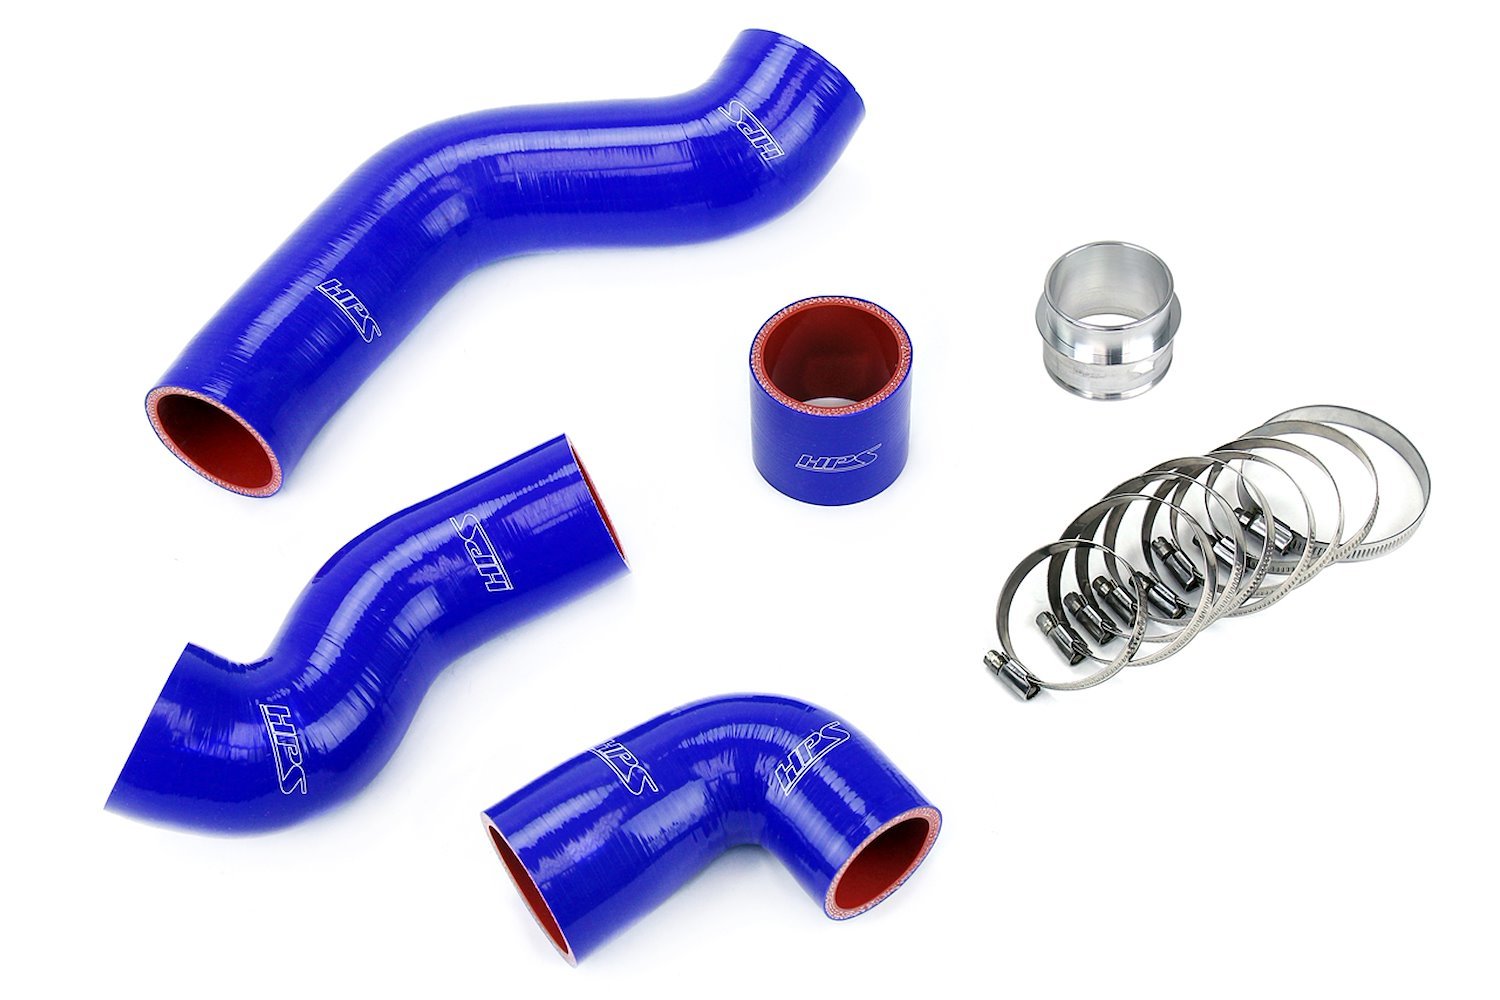 57-1845-BLUE Intercooler Hose Kit, High-Temp 4-Ply Reinforced Silicone, Replace OEM Rubber Intercooler Turbo Boots